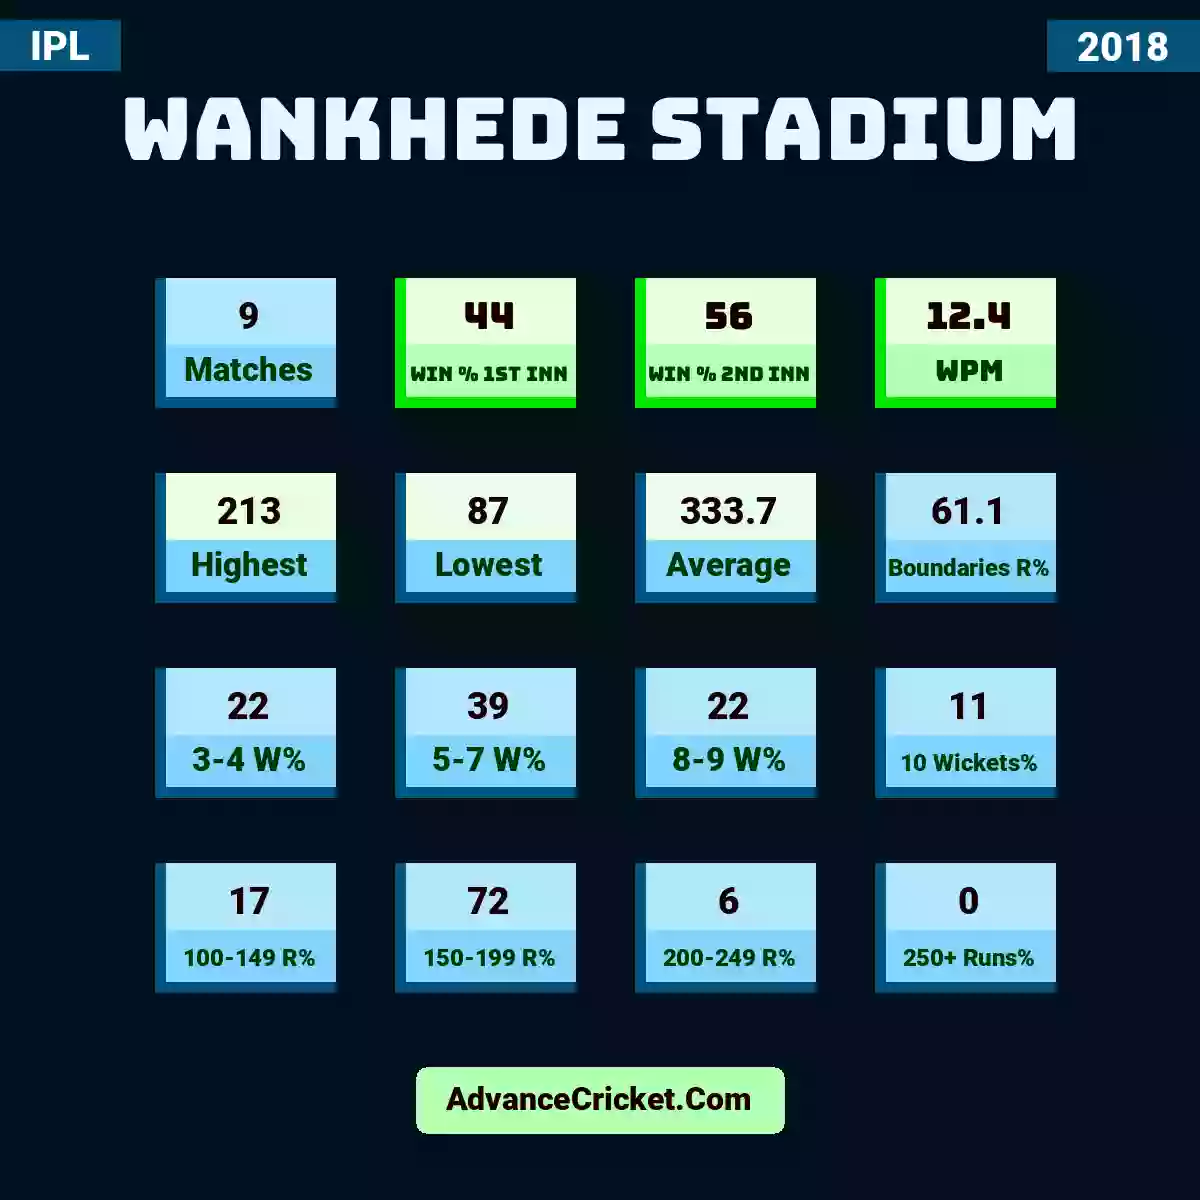 Image showing Wankhede Stadium with Matches: 9, Win % 1st Inn: 44, Win % 2nd Inn: 56, WPM: 12.4, Highest: 213, Lowest: 87, Average: 333.7, Boundaries R%: 61.1, 3-4 W%: 22, 5-7 W%: 39, 8-9 W%: 22, 10 Wickets%: 11, 100-149 R%: 17, 150-199 R%: 72, 200-249 R%: 6, 250+ Runs%: 0.